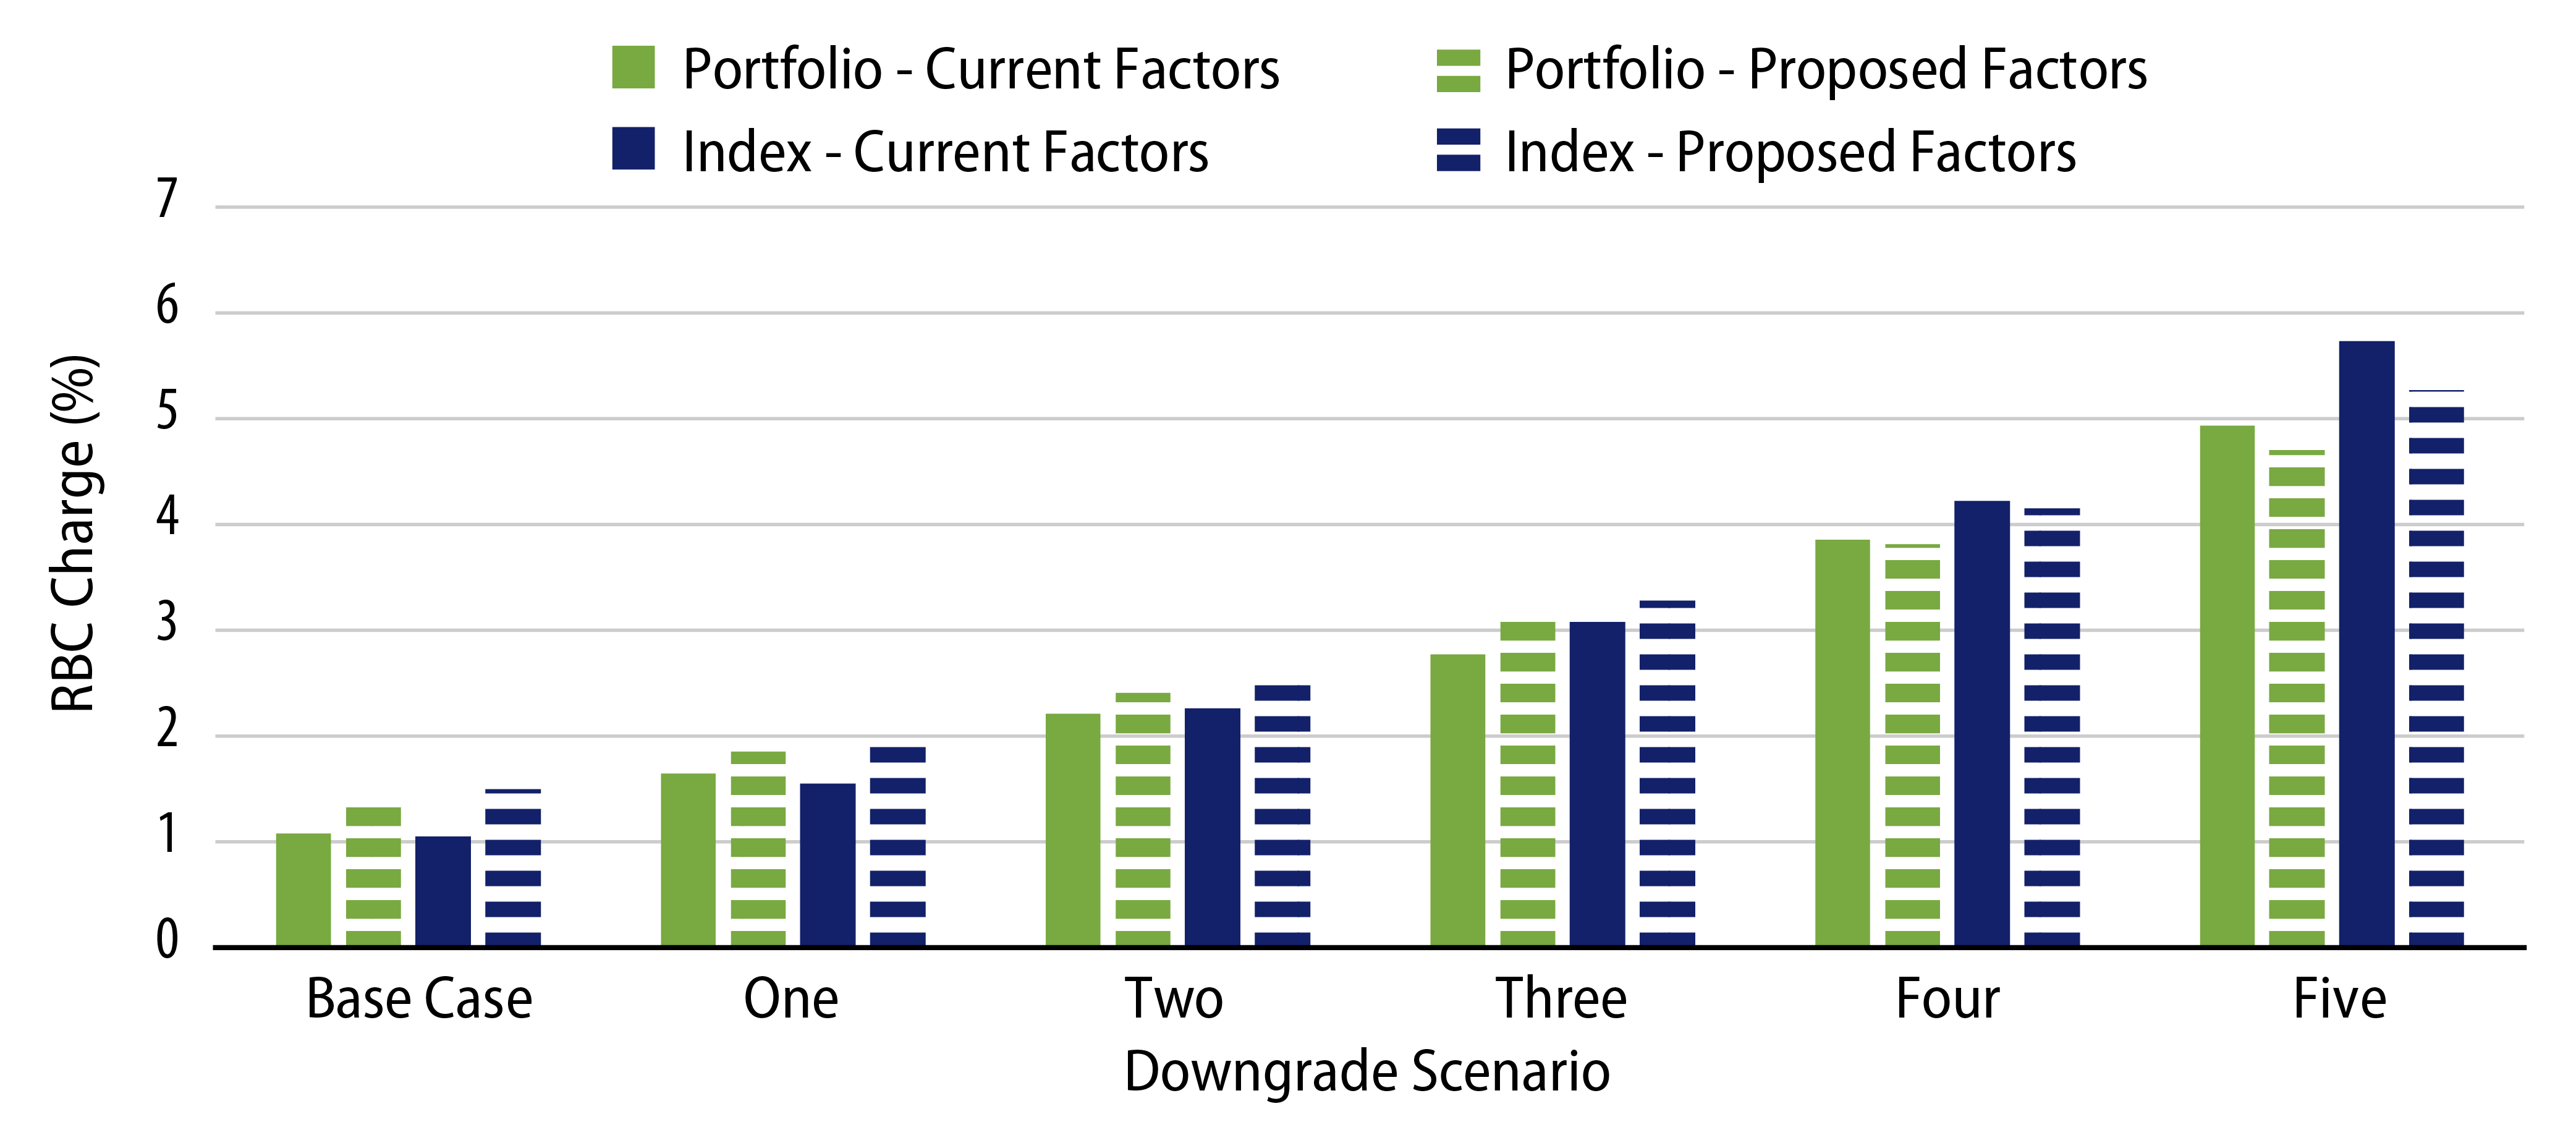 Explore Potential Downgrades and Capital Charges.